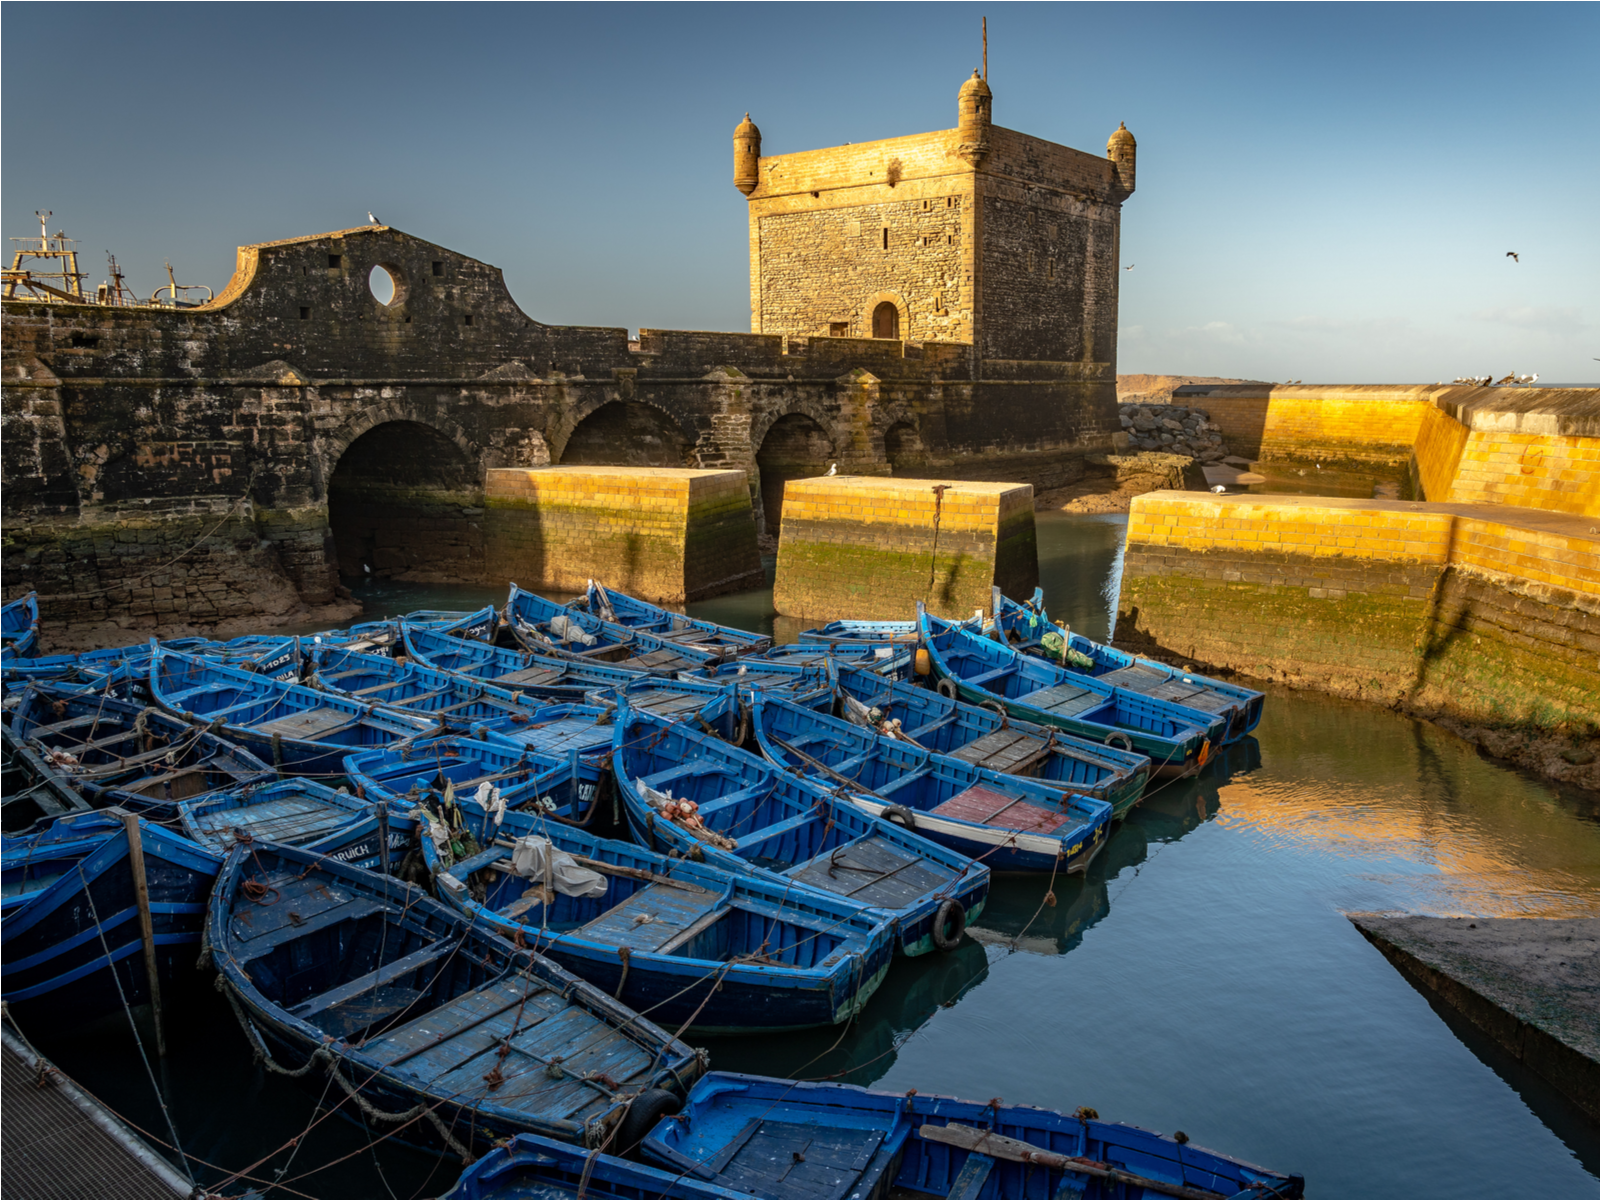 Sunset over the older Essaouira Citadel, a Game of Thrones filming locations you can visit, where used blue fishing boats and docked